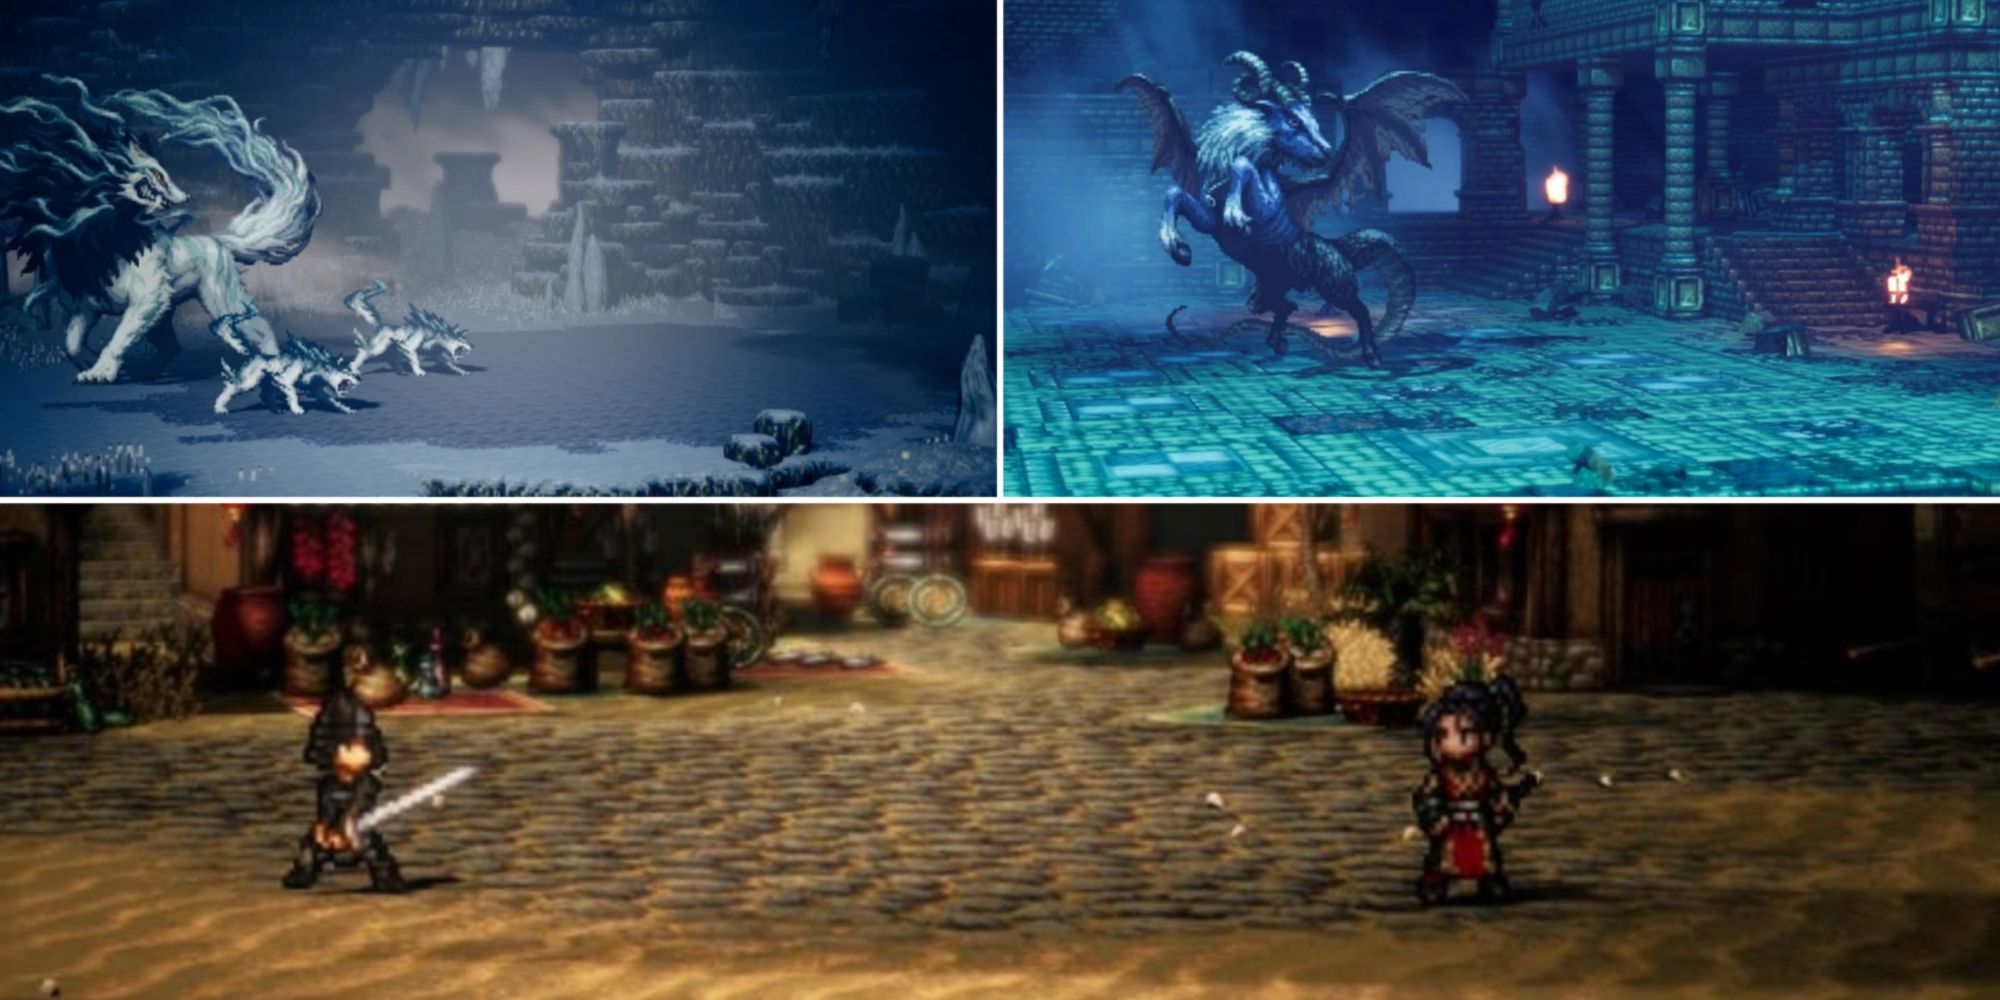 A collage of images, with the top left showcasing the arena of the Dreadwolf boss encounter from the first Octopath Traveler and the top right showcasing the Devourer of Dreams arena, which is also from the first Octopath Traveler title. The bottom image is a dual between Hikari and a soldier in Octopath Traveler 2.